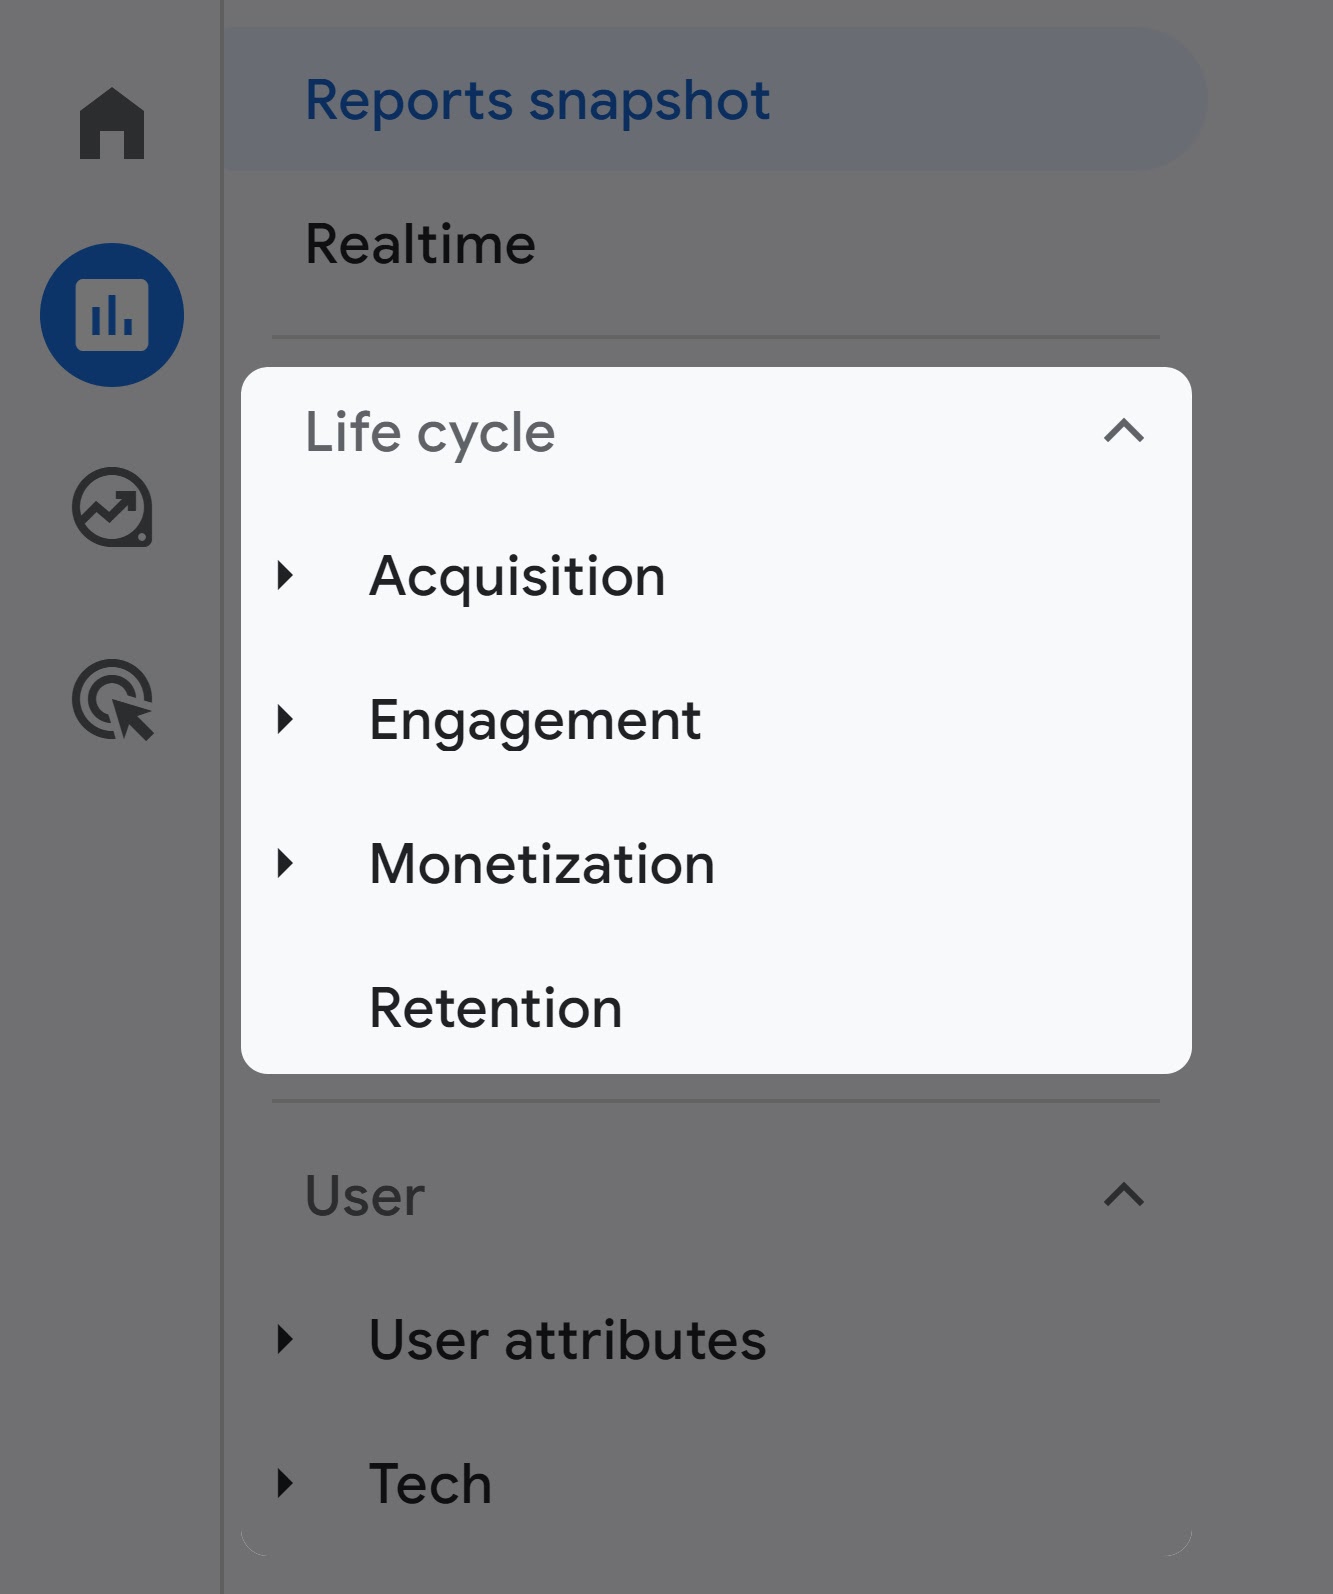 “Life cycle” postulation  connected  your dashboard